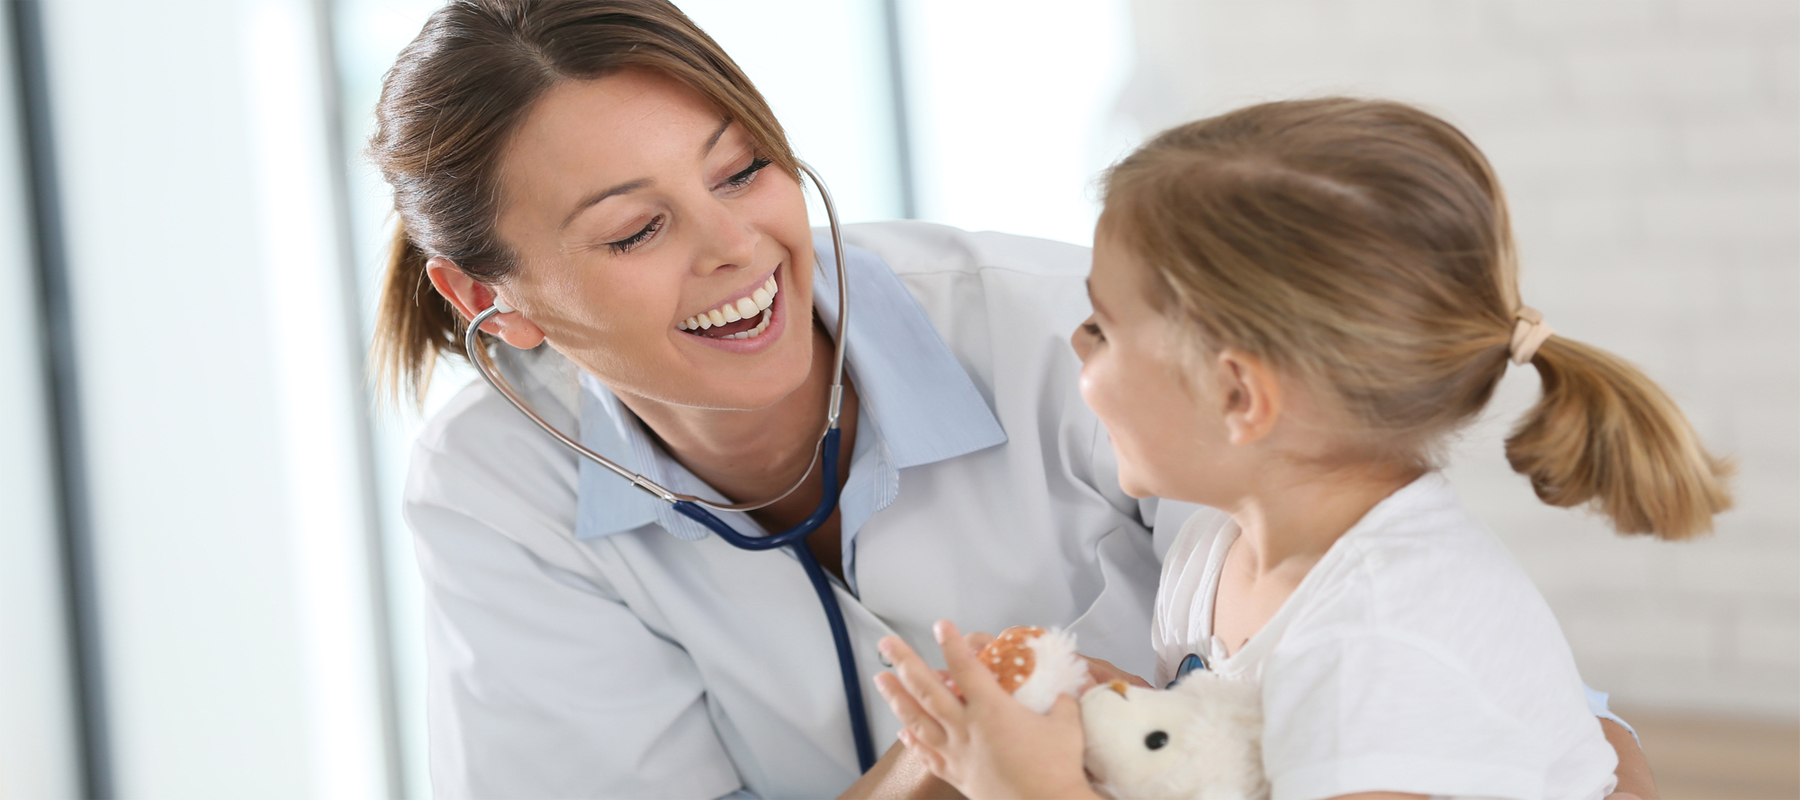 EHR Electronic Health Records From Pediatric Practice